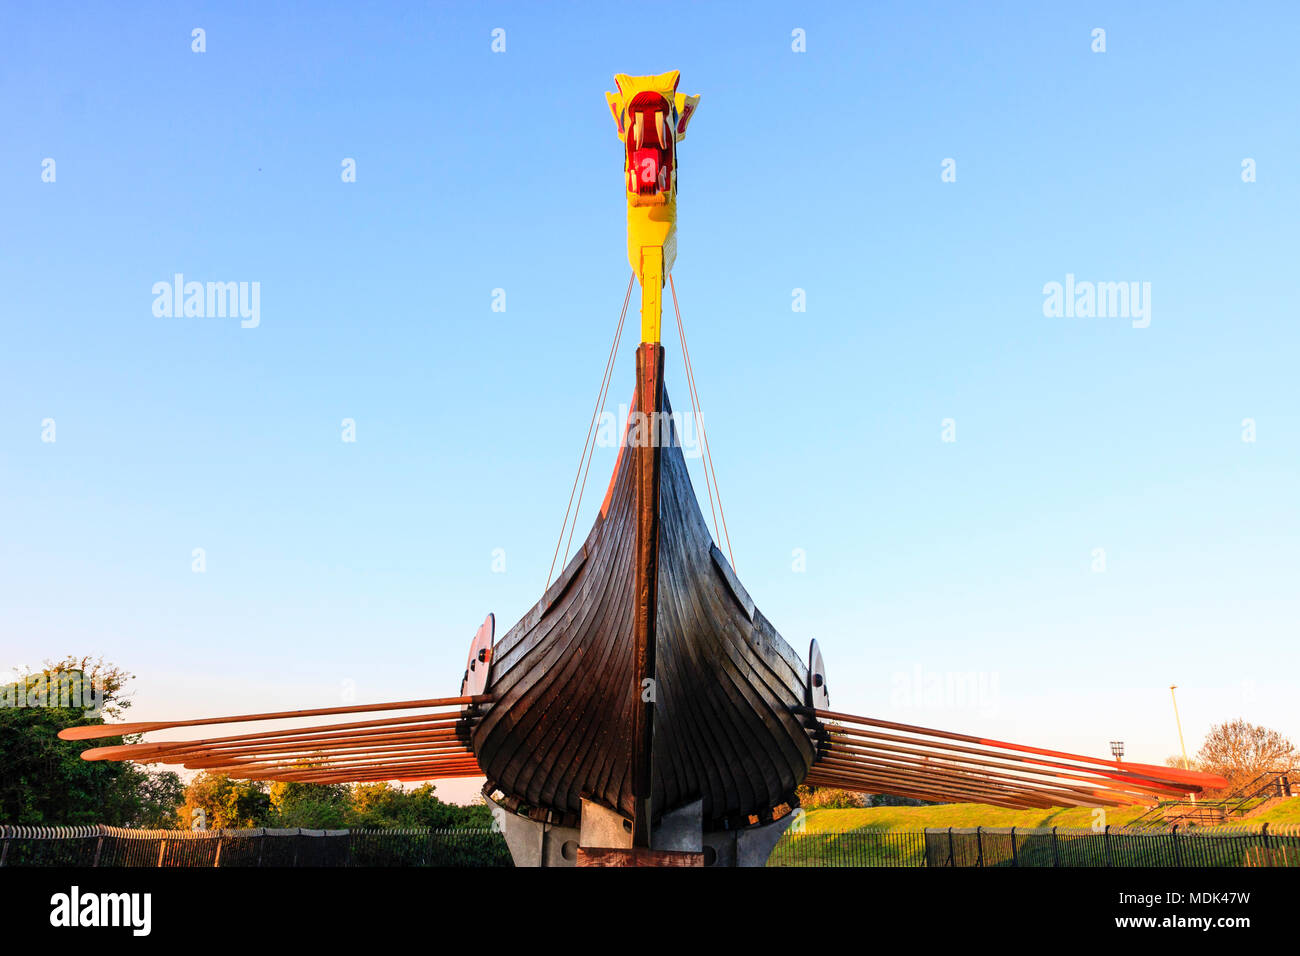 The Hugin, re-constructed Viking Ship on stand at Pegwell, Ramsgate. Lit up by sunrise light during the golden hour. Blue sky background. Stock Photo